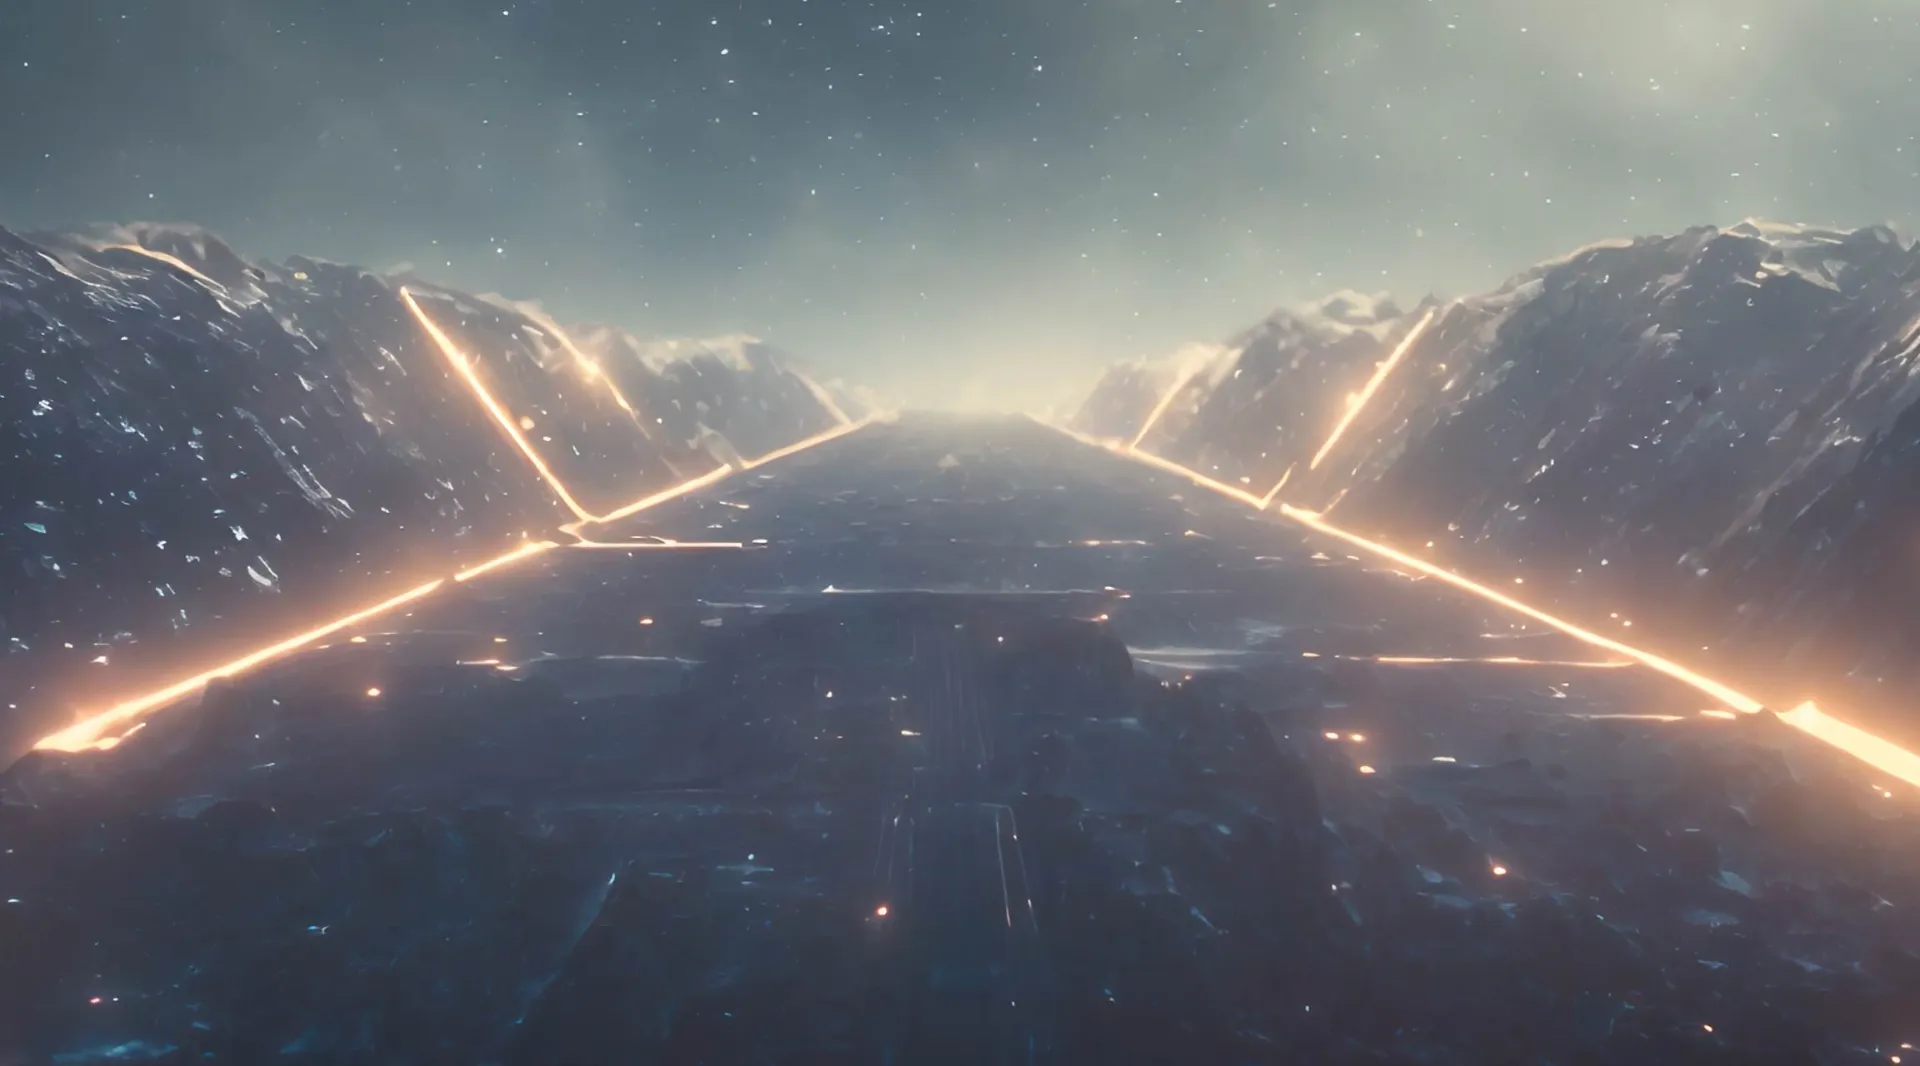 Futuristic Glowing Trail Through Icy Peaks Video Backdrop